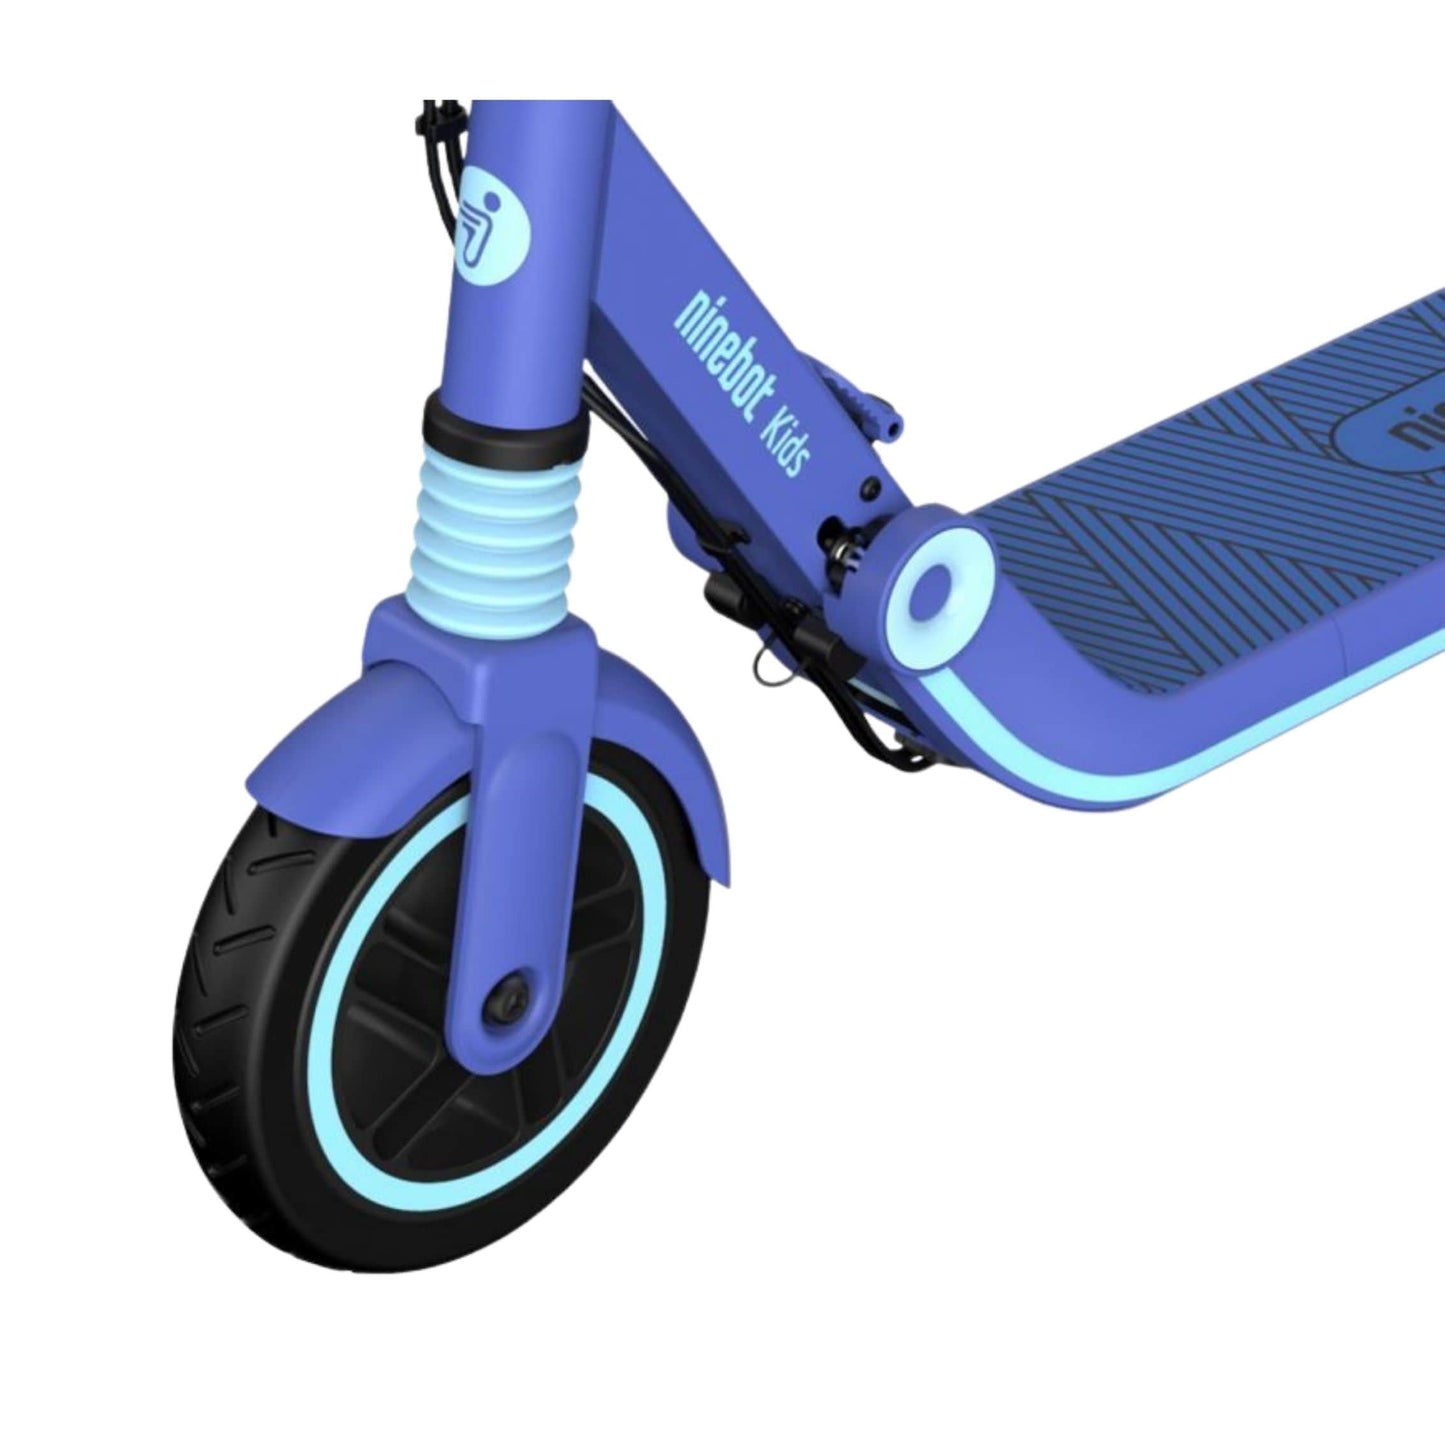 Segway Ninebot Zing E8 Electric Scooter